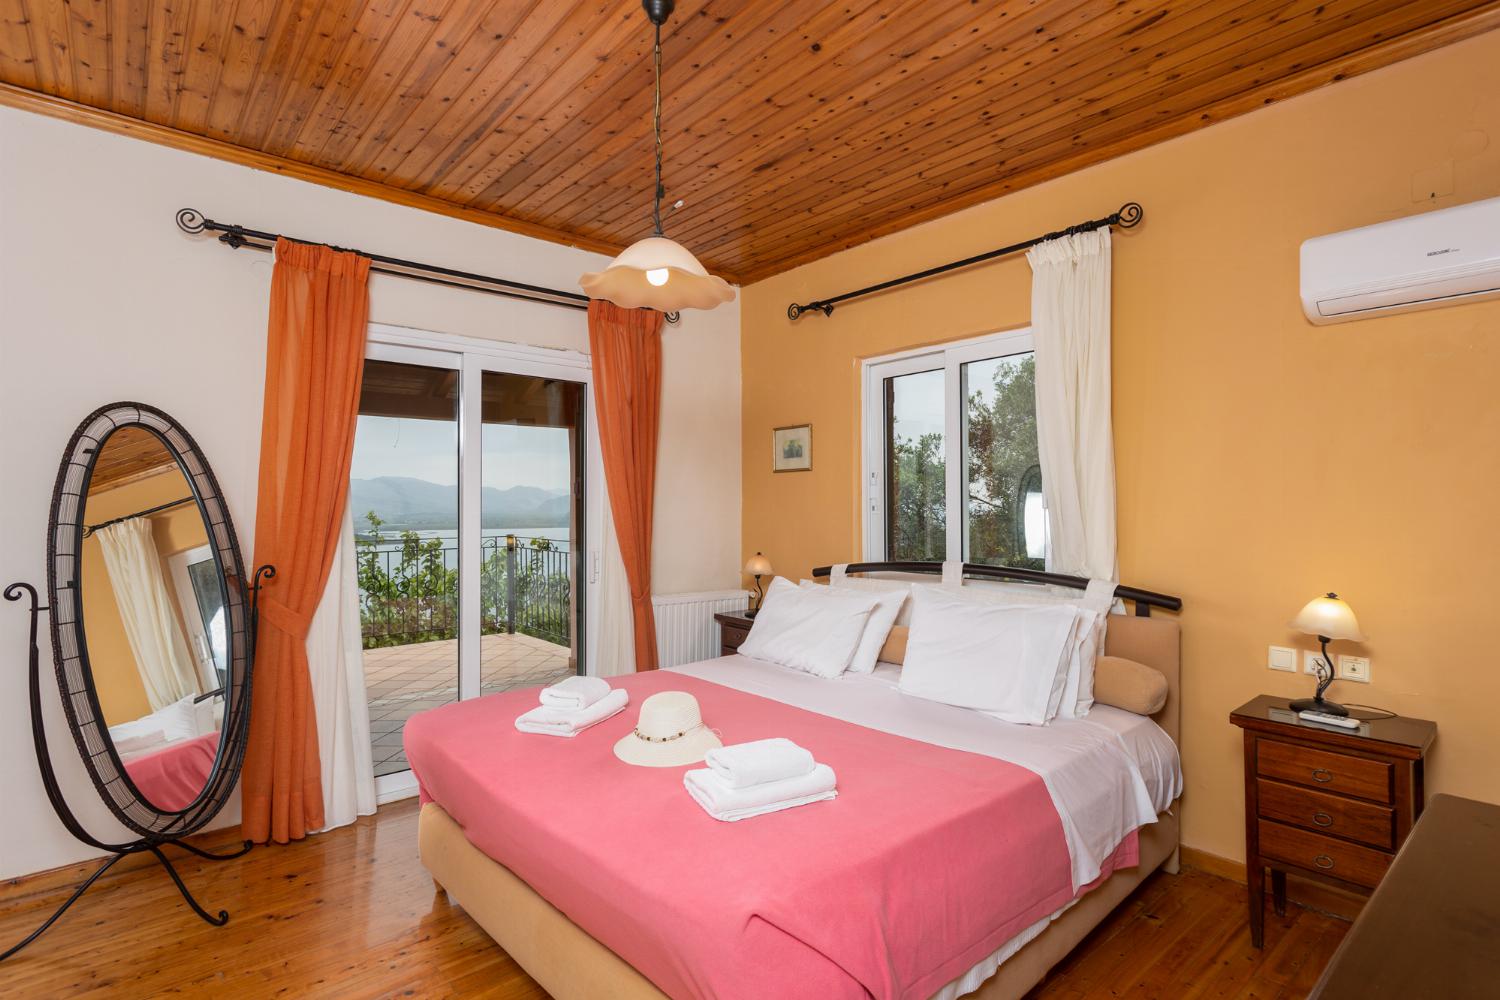 Double bedroom on first floor with en suite bathroom, A/C, and sea views